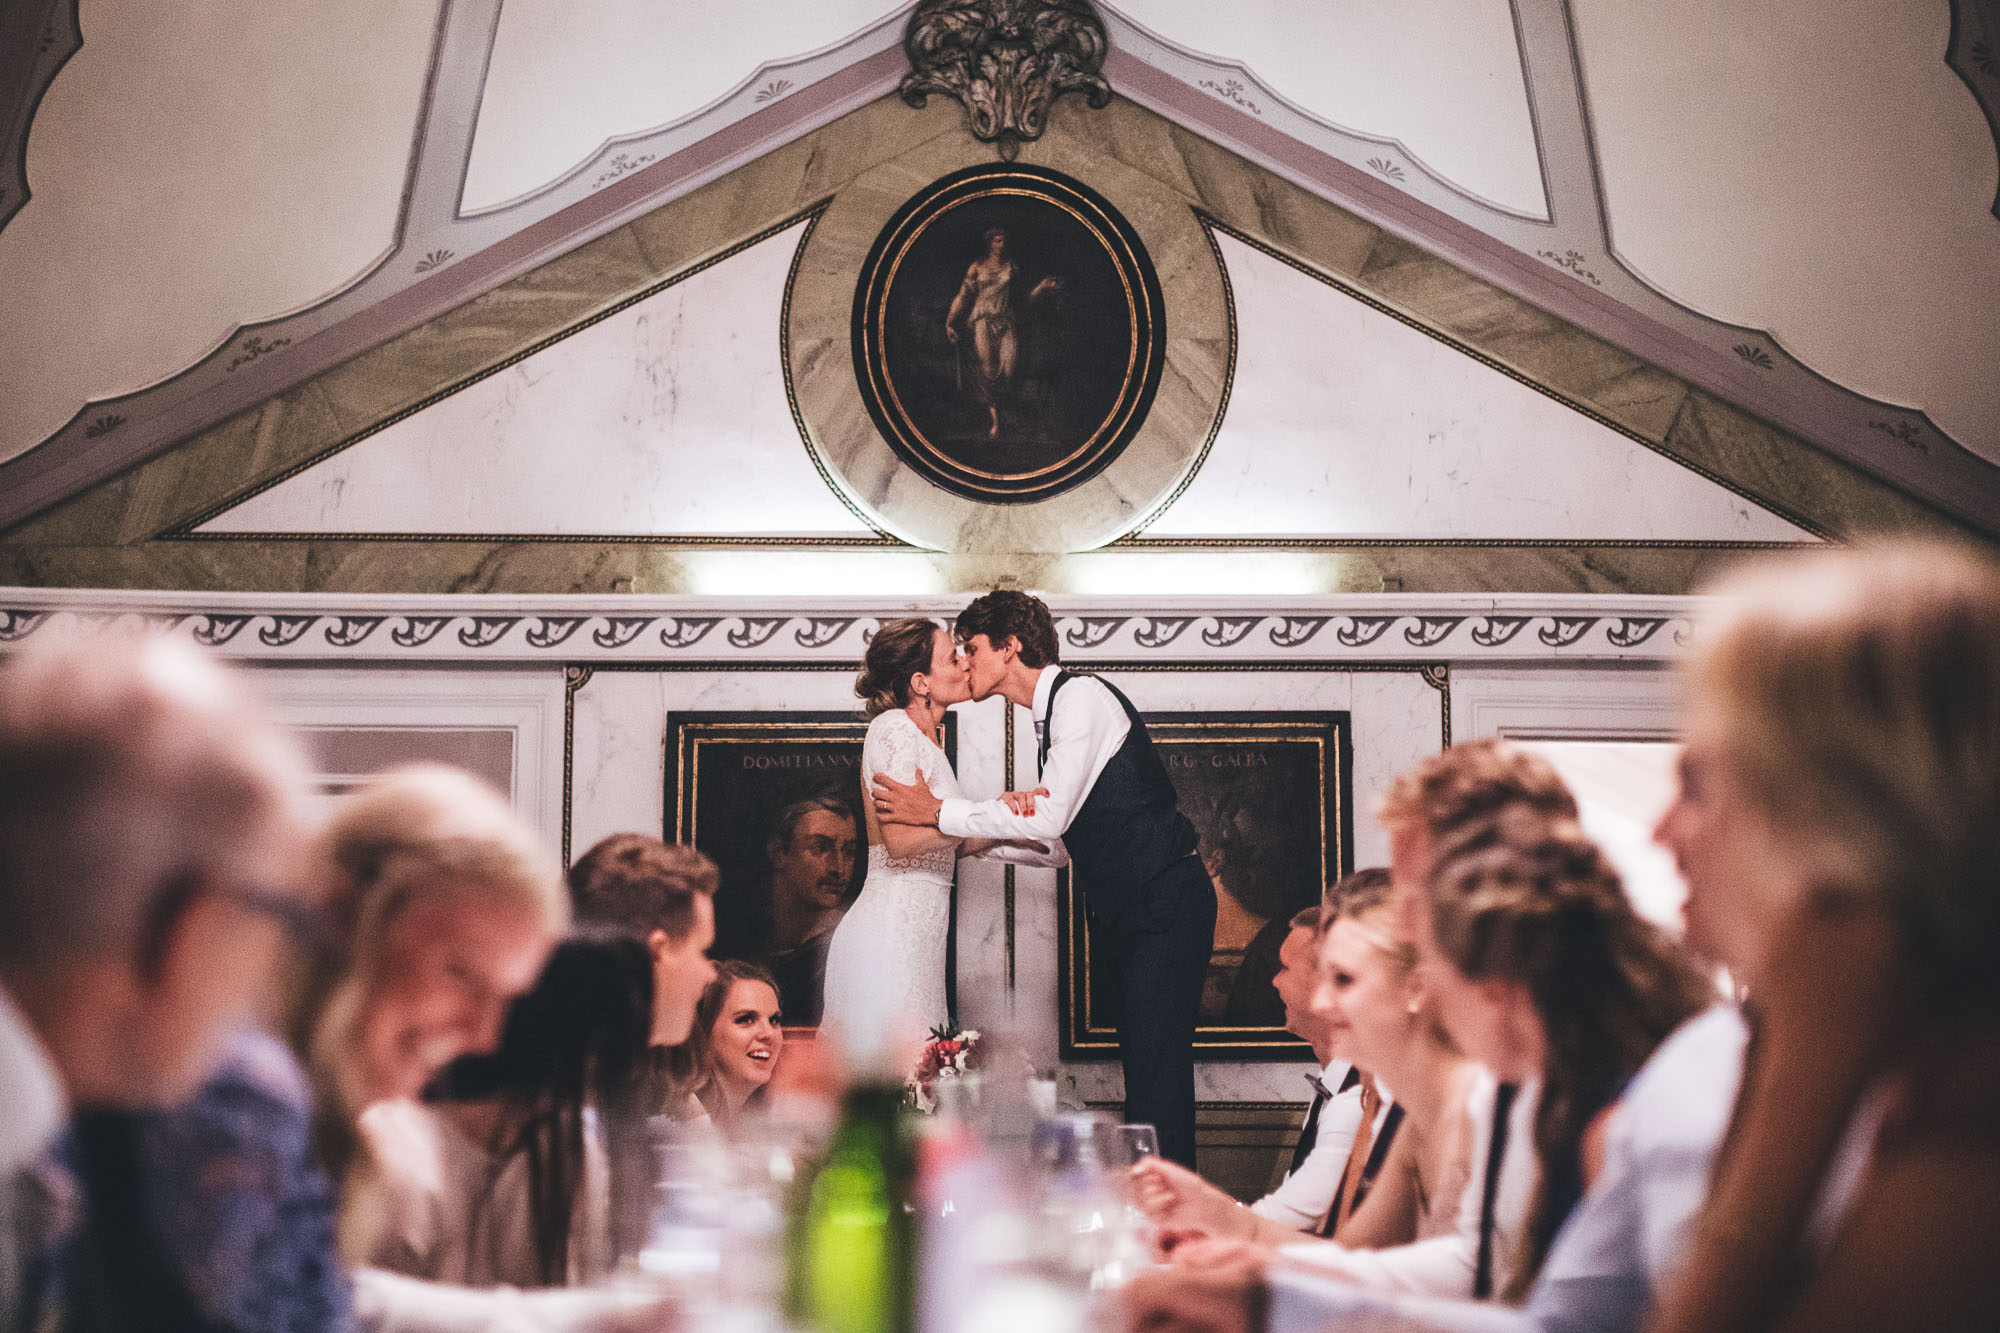 wedding tradition from scandinavia where couple stand on chairs to kiss